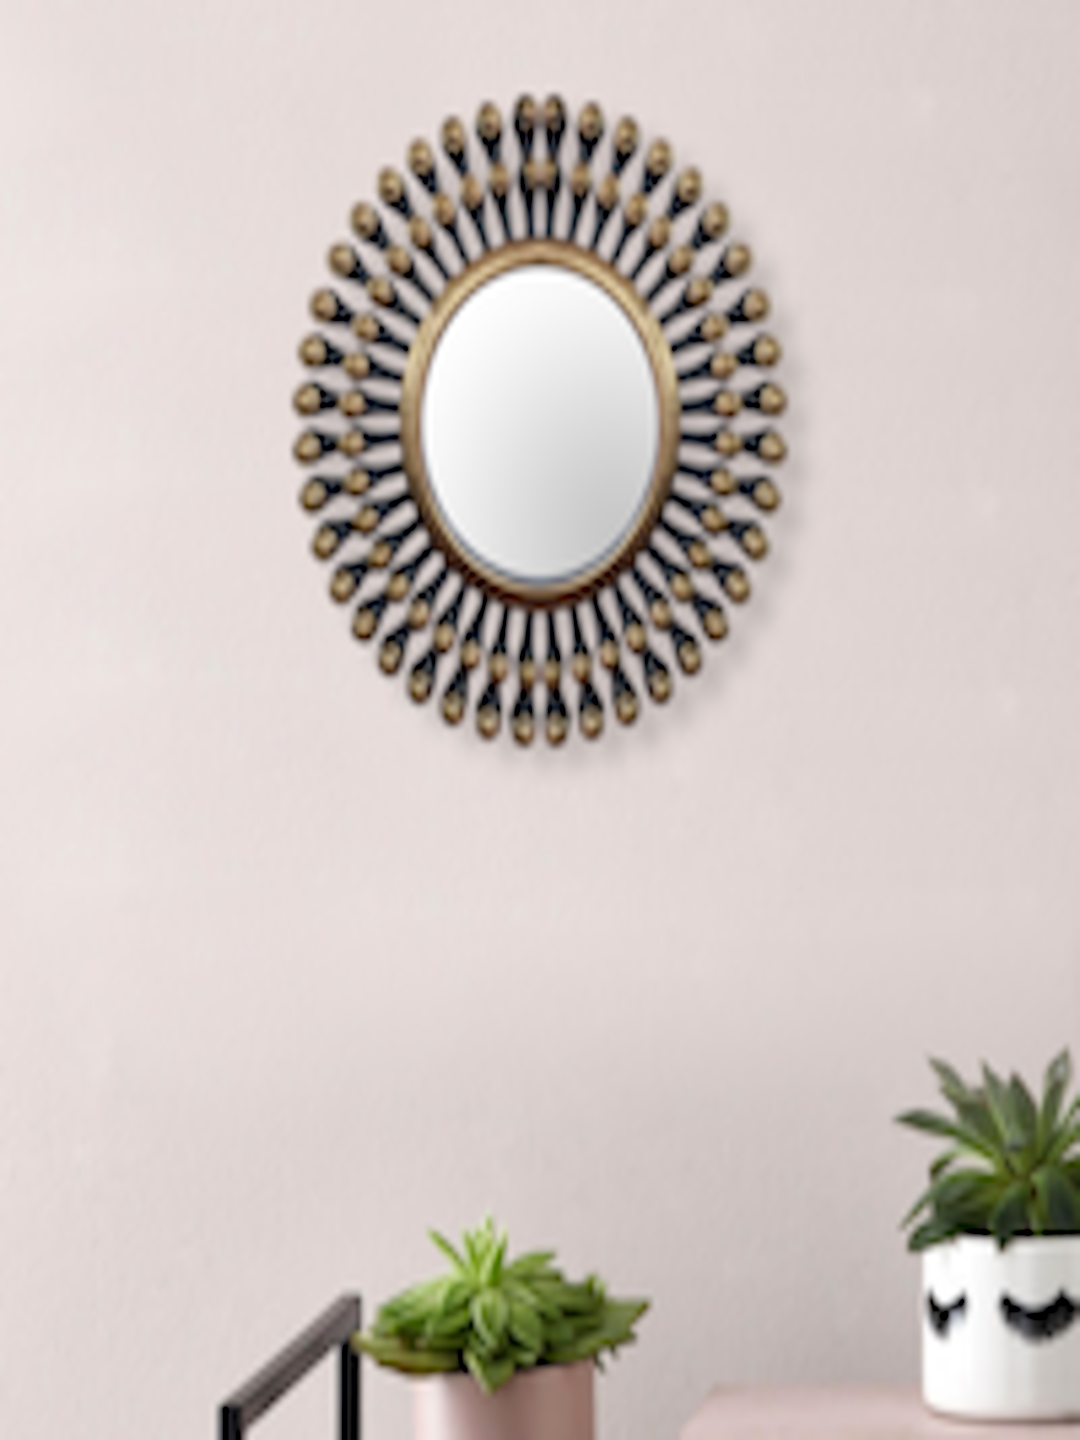 Buy Art Street Gold Toned Plastic Wall Mirror Mirrors for Unisex 10616436 Myntra